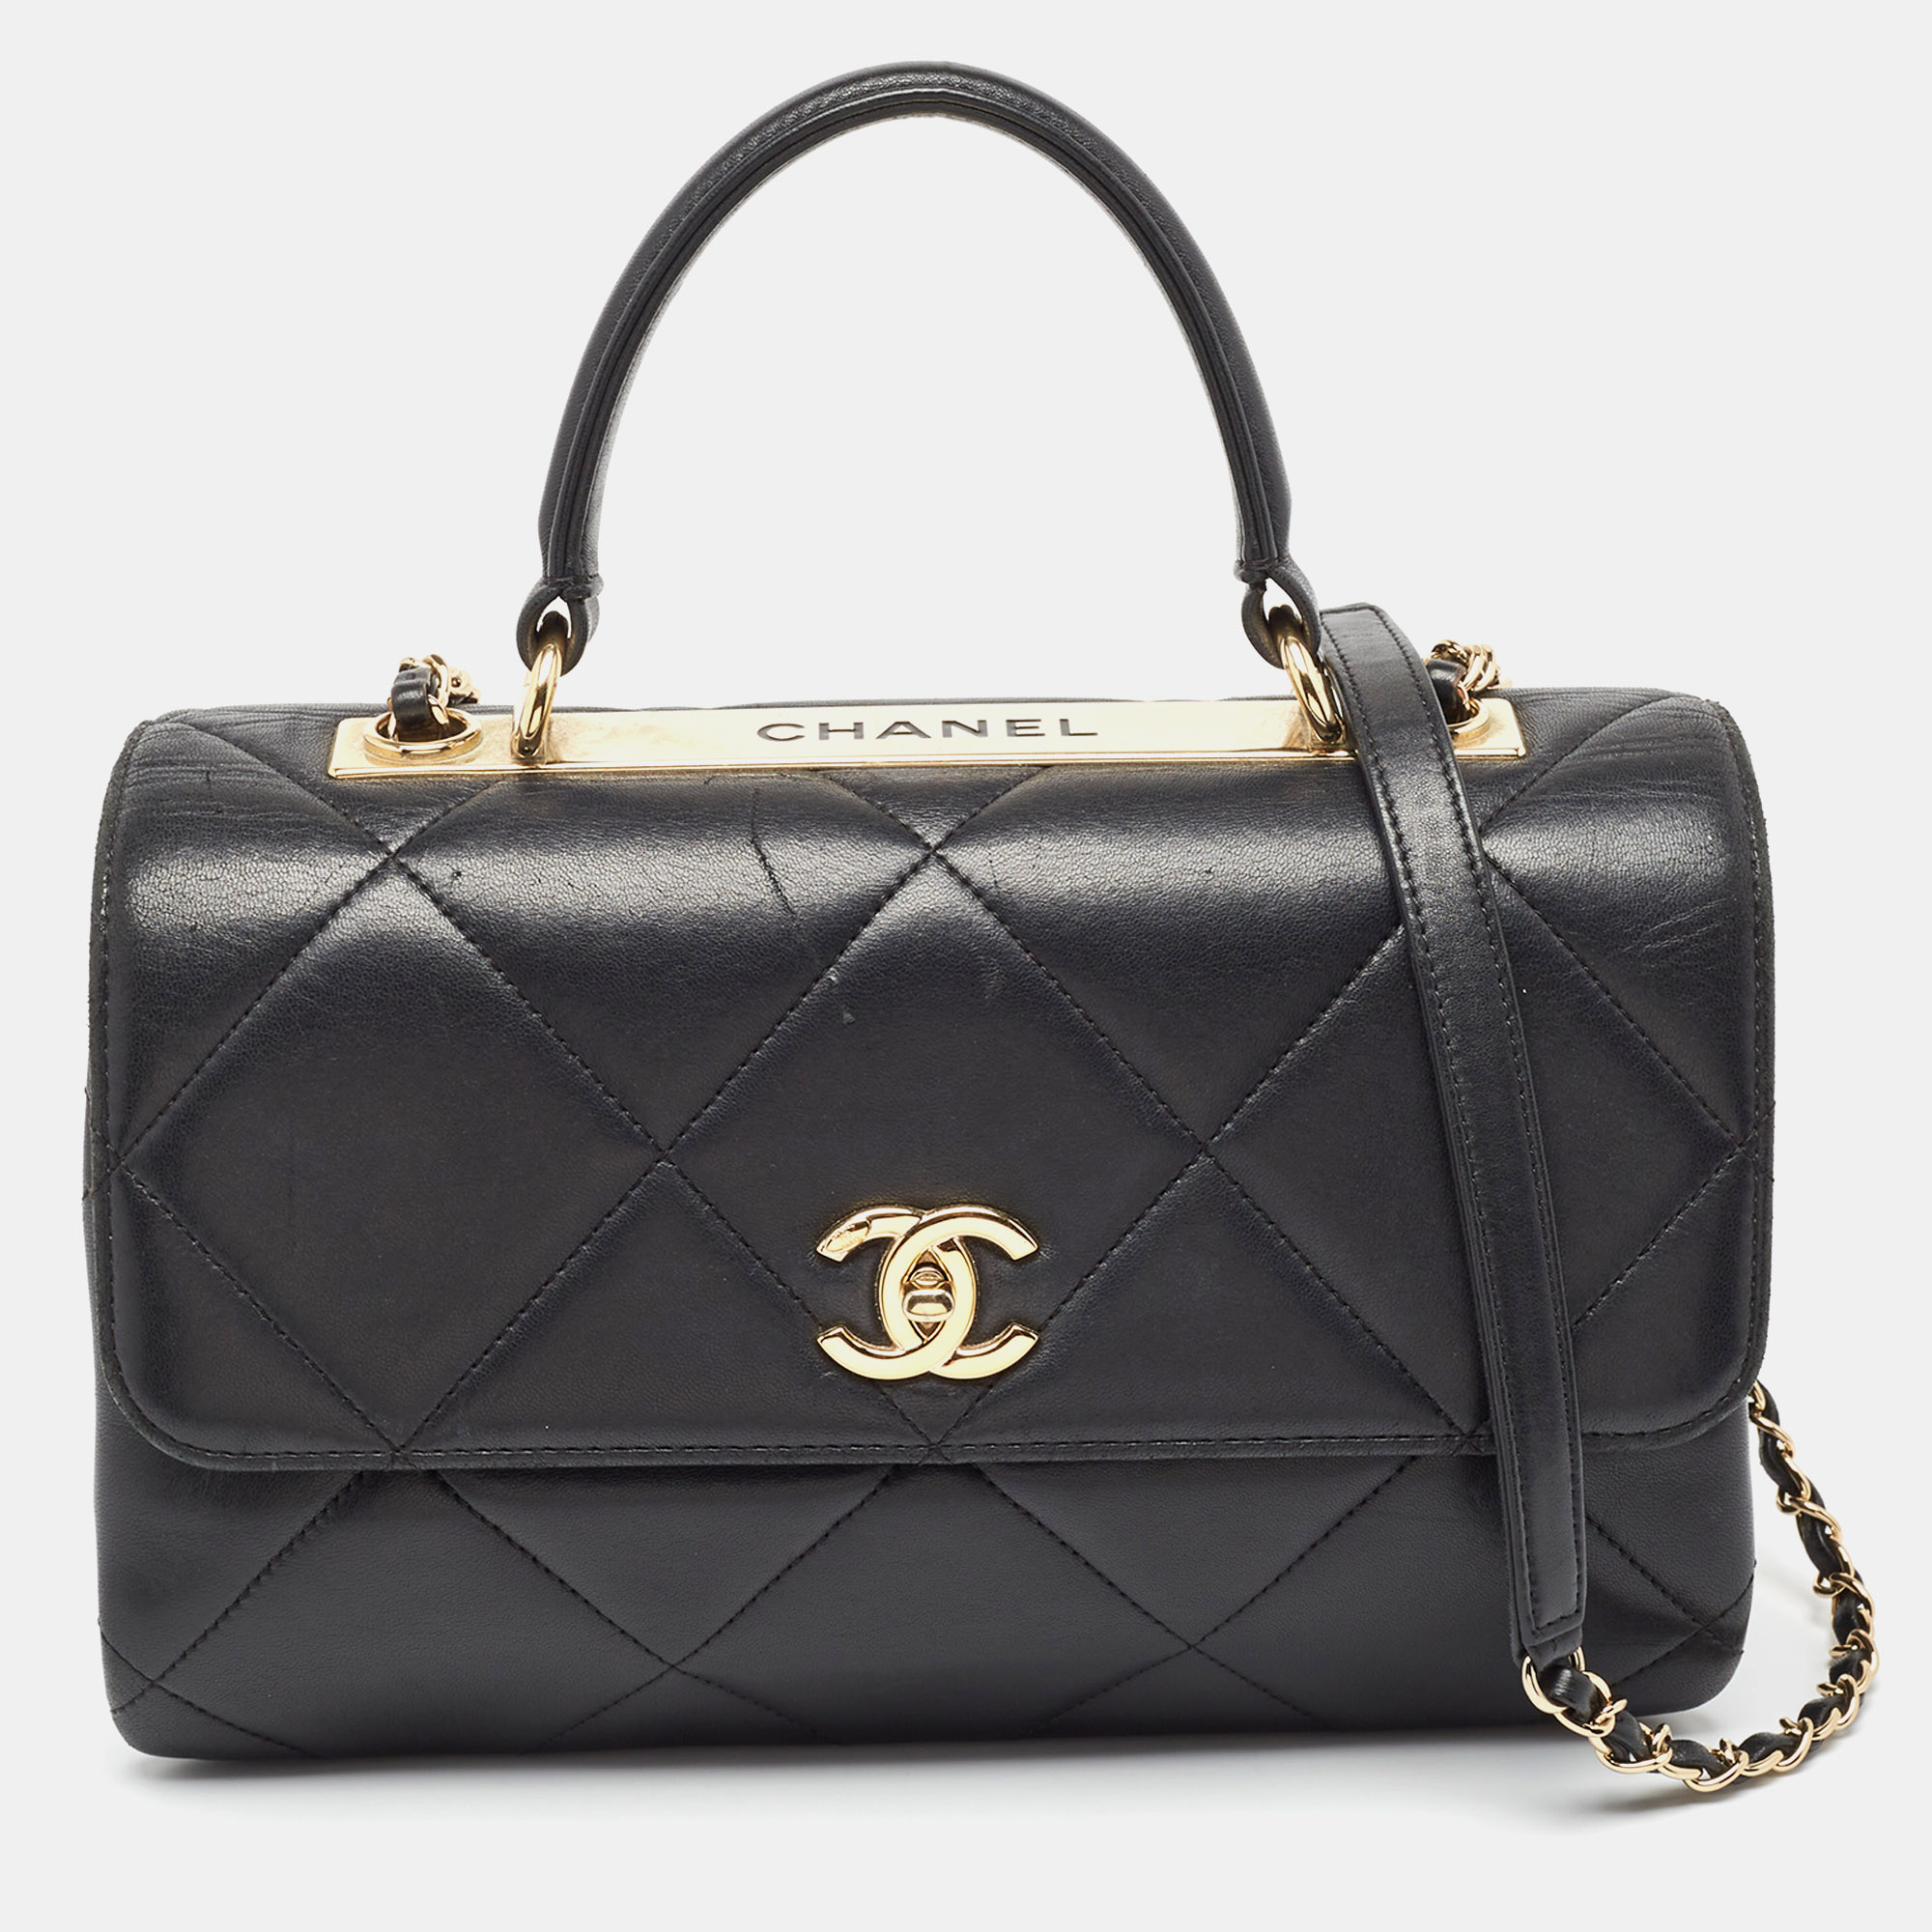 

Chanel Black Quilted Leather Large Trendy CC Top Handle Bag